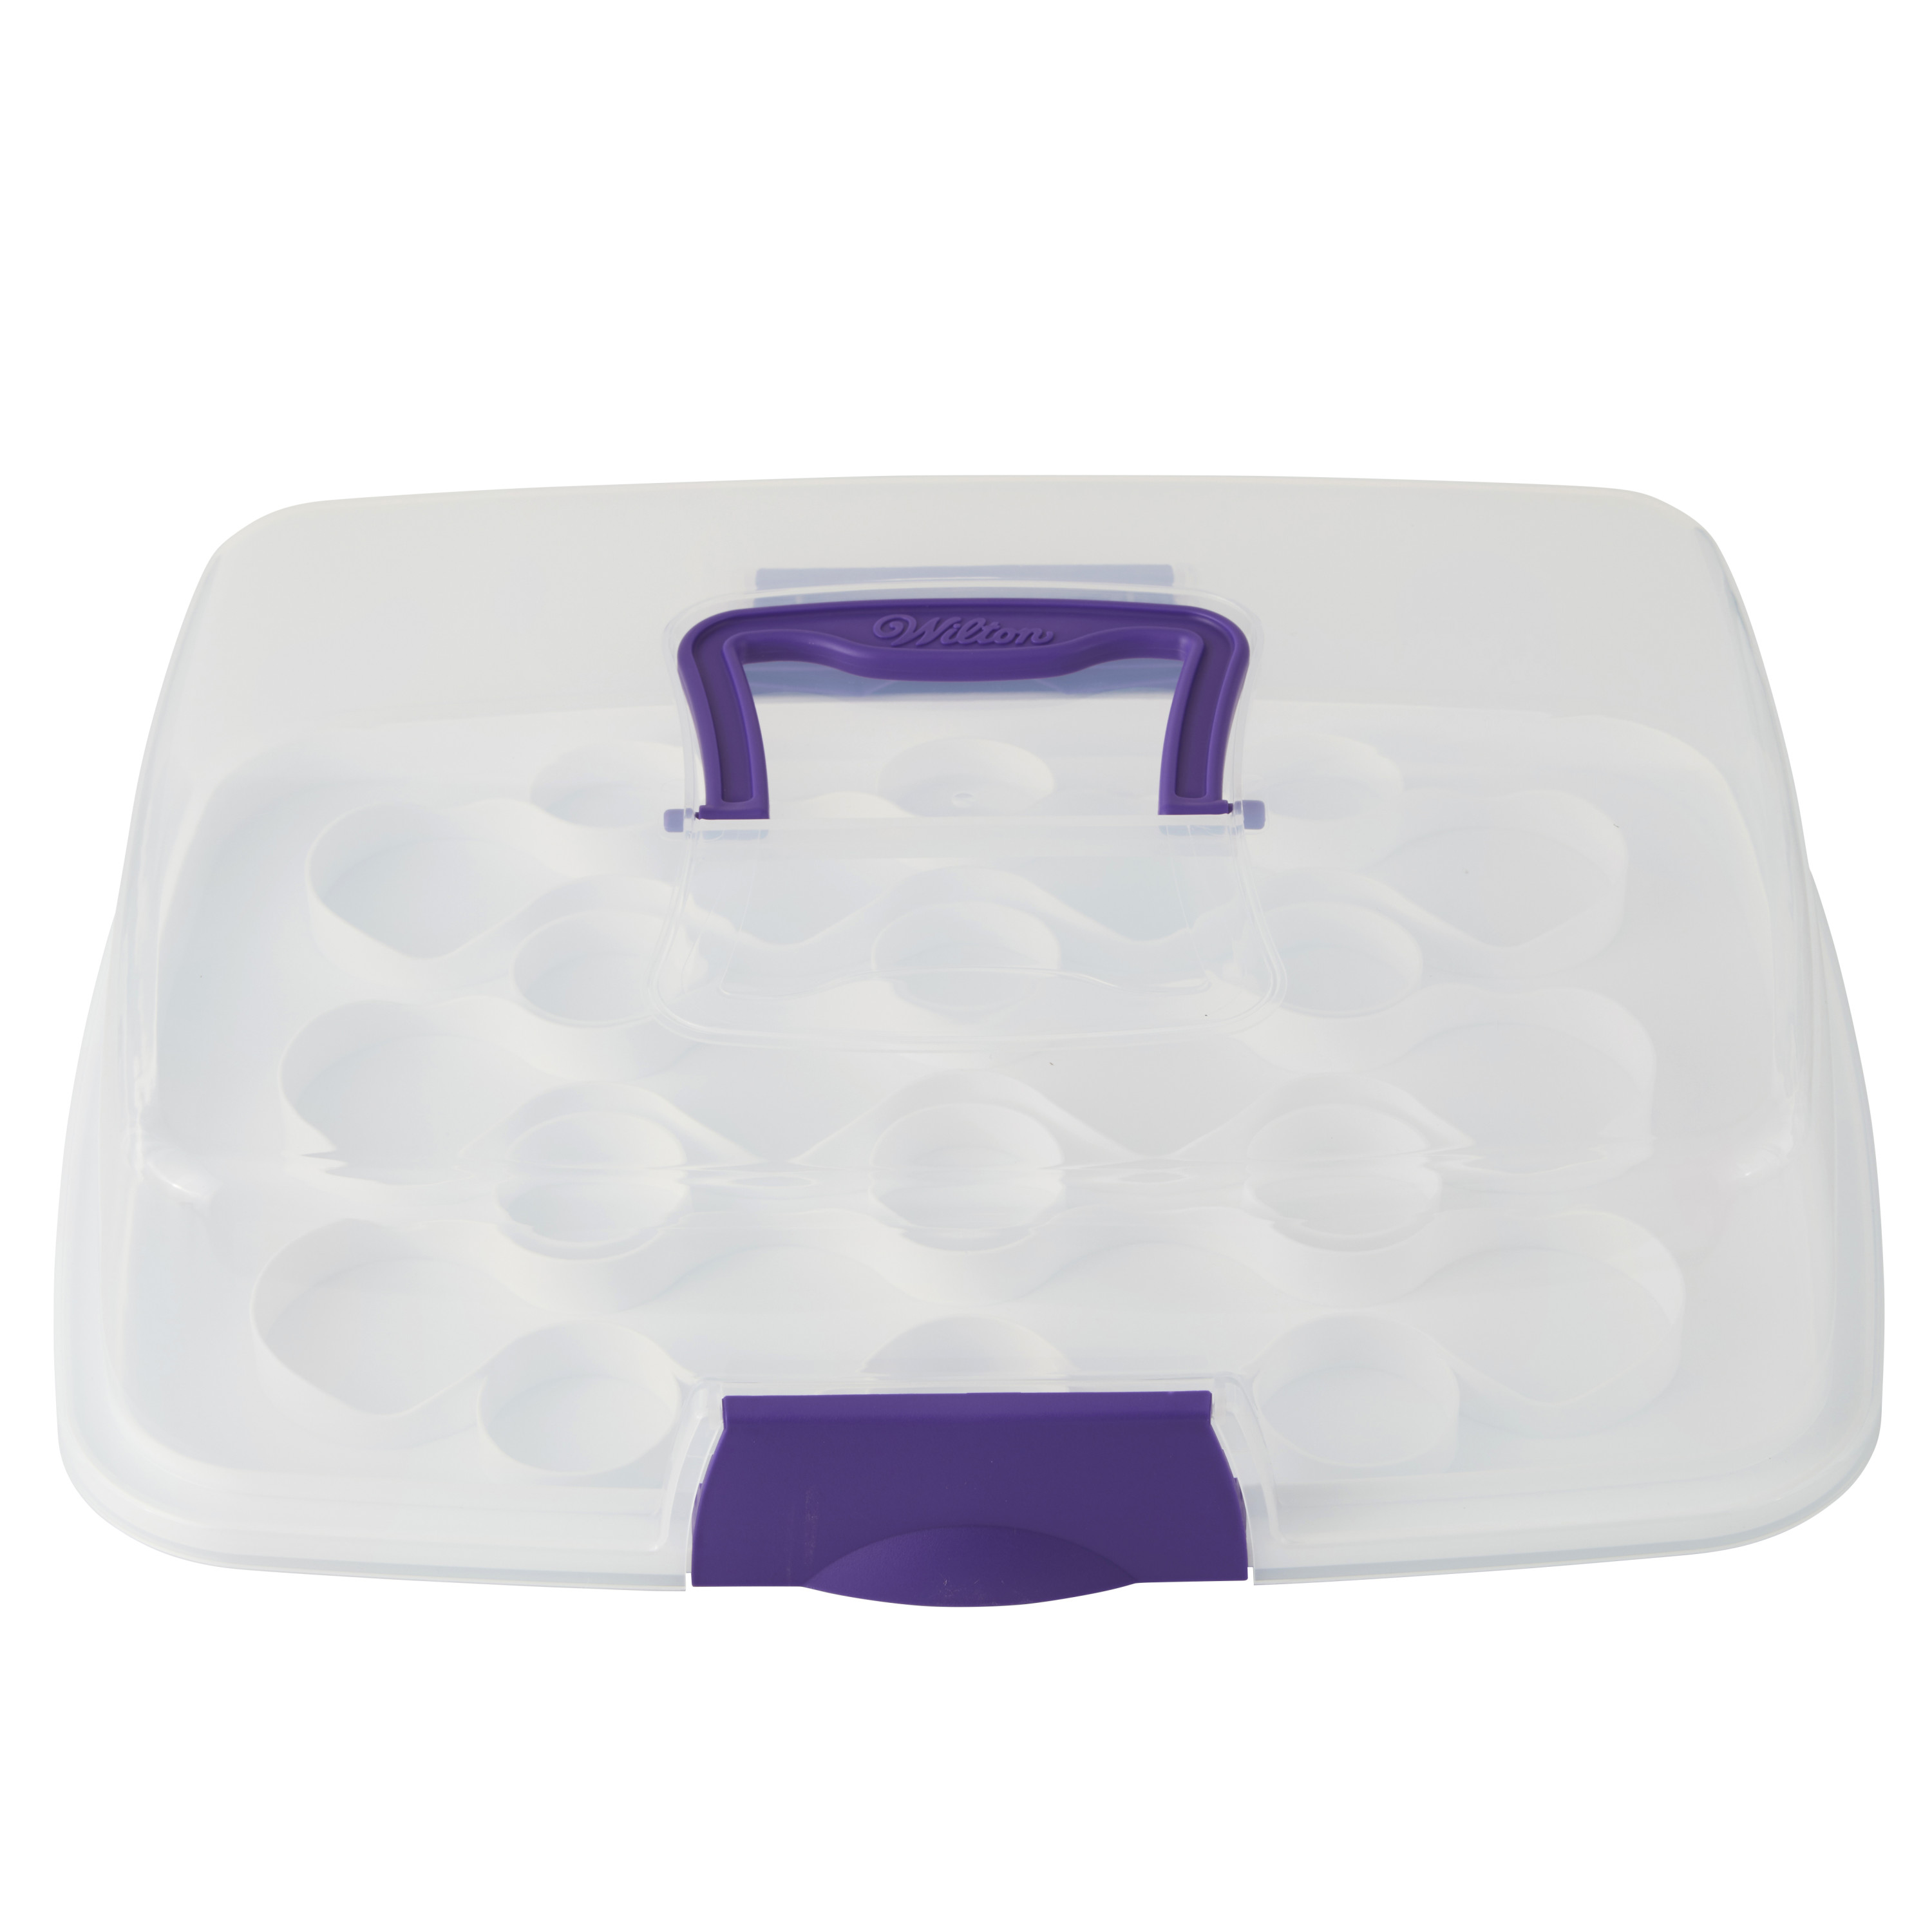 Wilton Oblong Cake and Cupcake Carrier, Practical Cupcake Container, Plastic - image 1 of 11